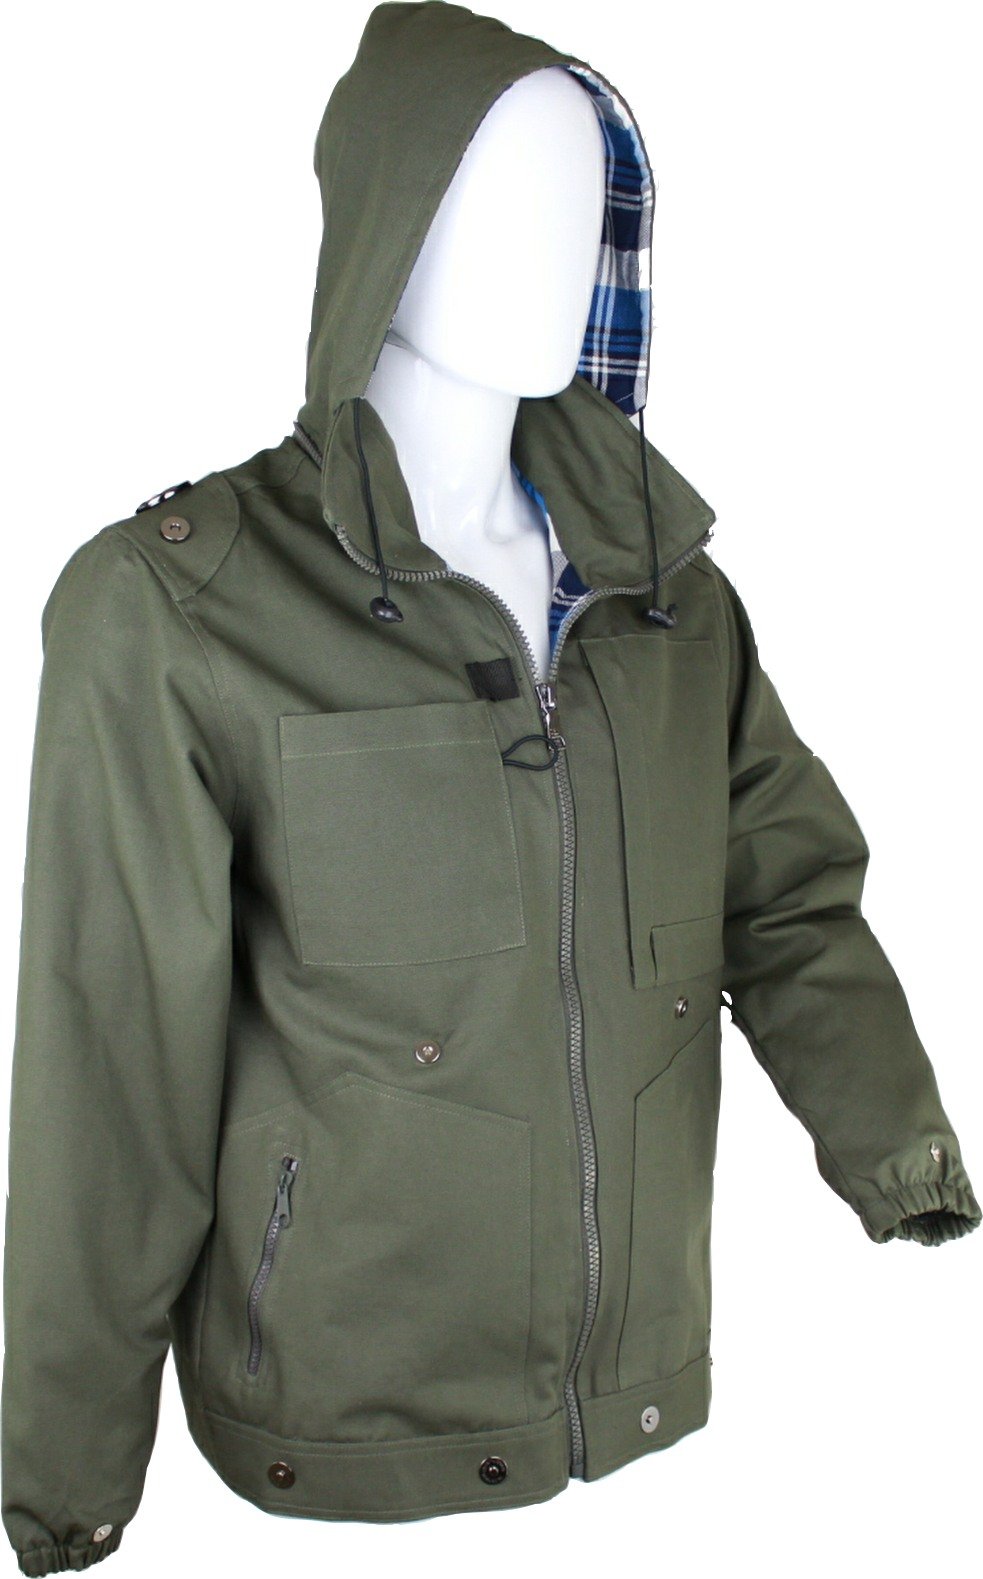 Cotton Canvas Jacket Convertible to Carry-On Backpack Travel Outdoor Camping Fishing - T&S Impact